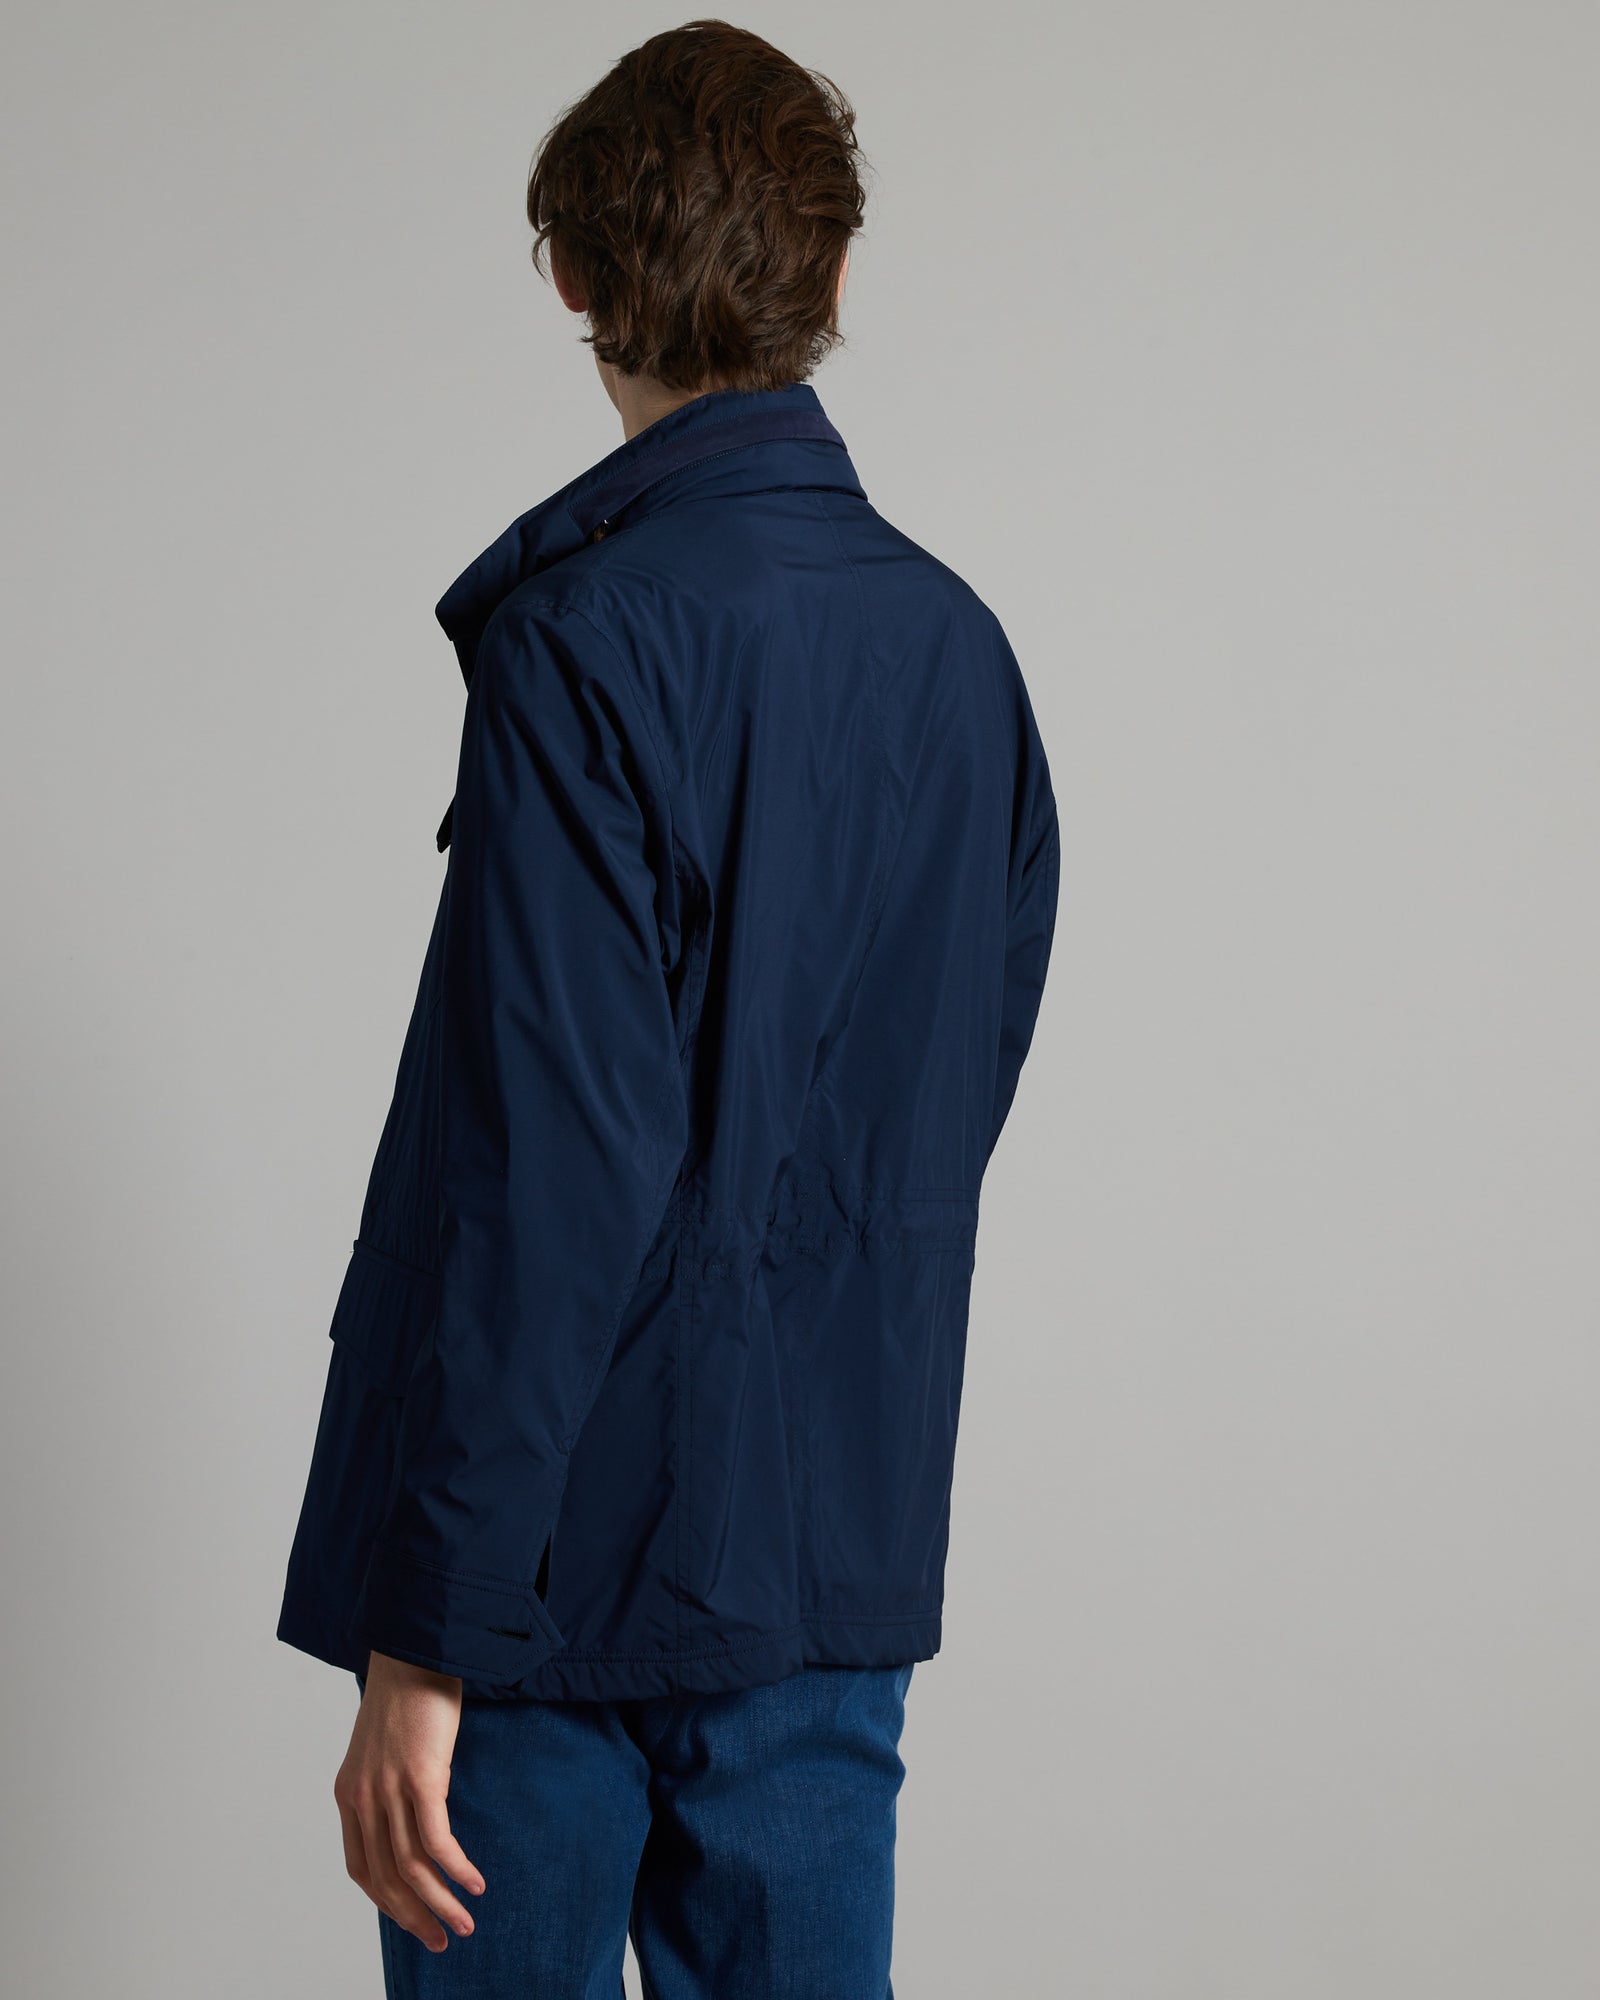 Outerwear ENDEAVOUR 20 KNOTS in marine